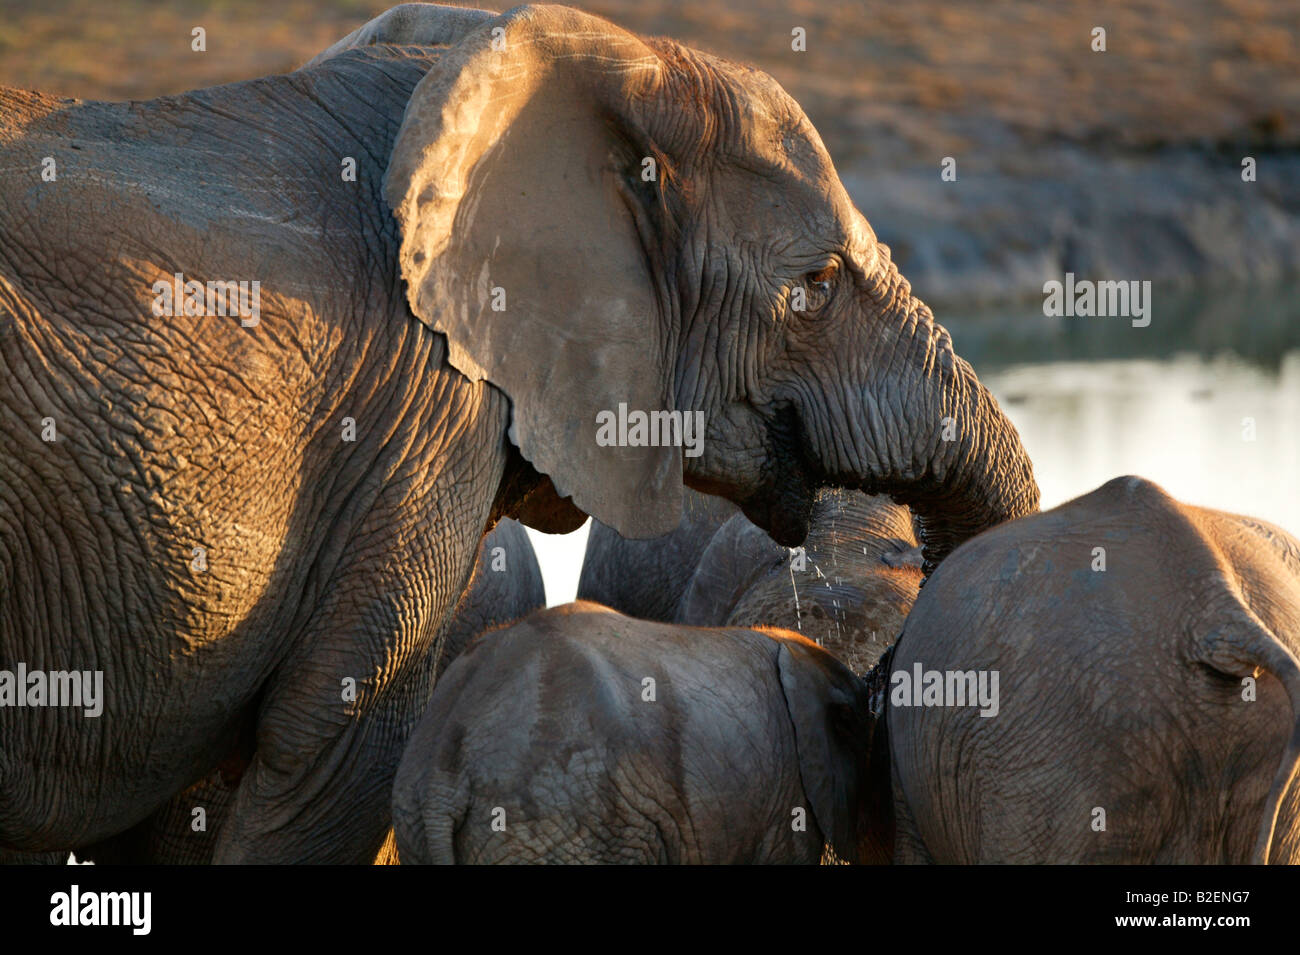 A tight portrait of an elephant drinking Stock Photo